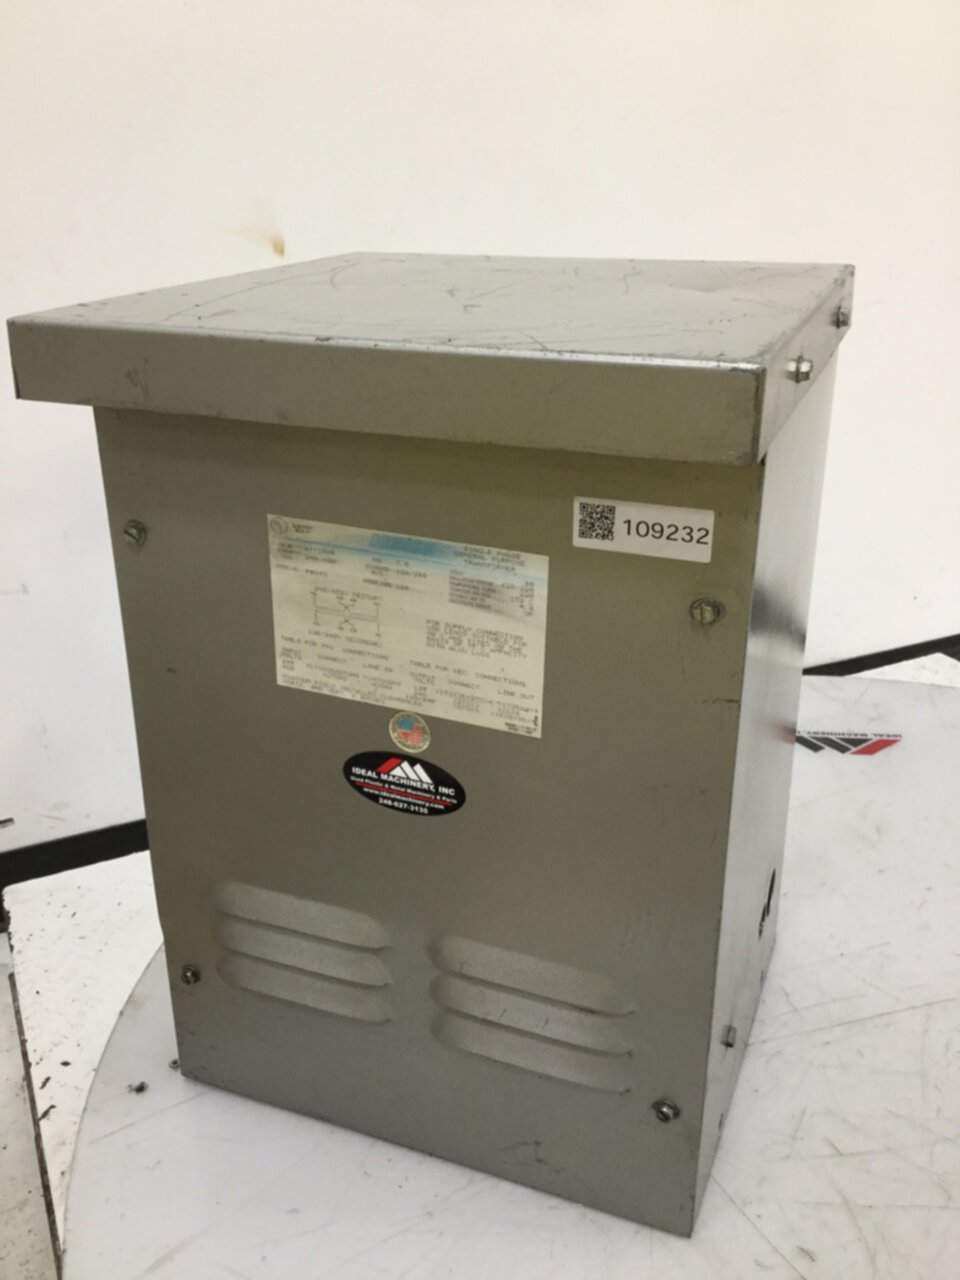 Details about   GRAND TRANSFORMERS 4.5 kVA Transformer 470144-3 Used #76527 